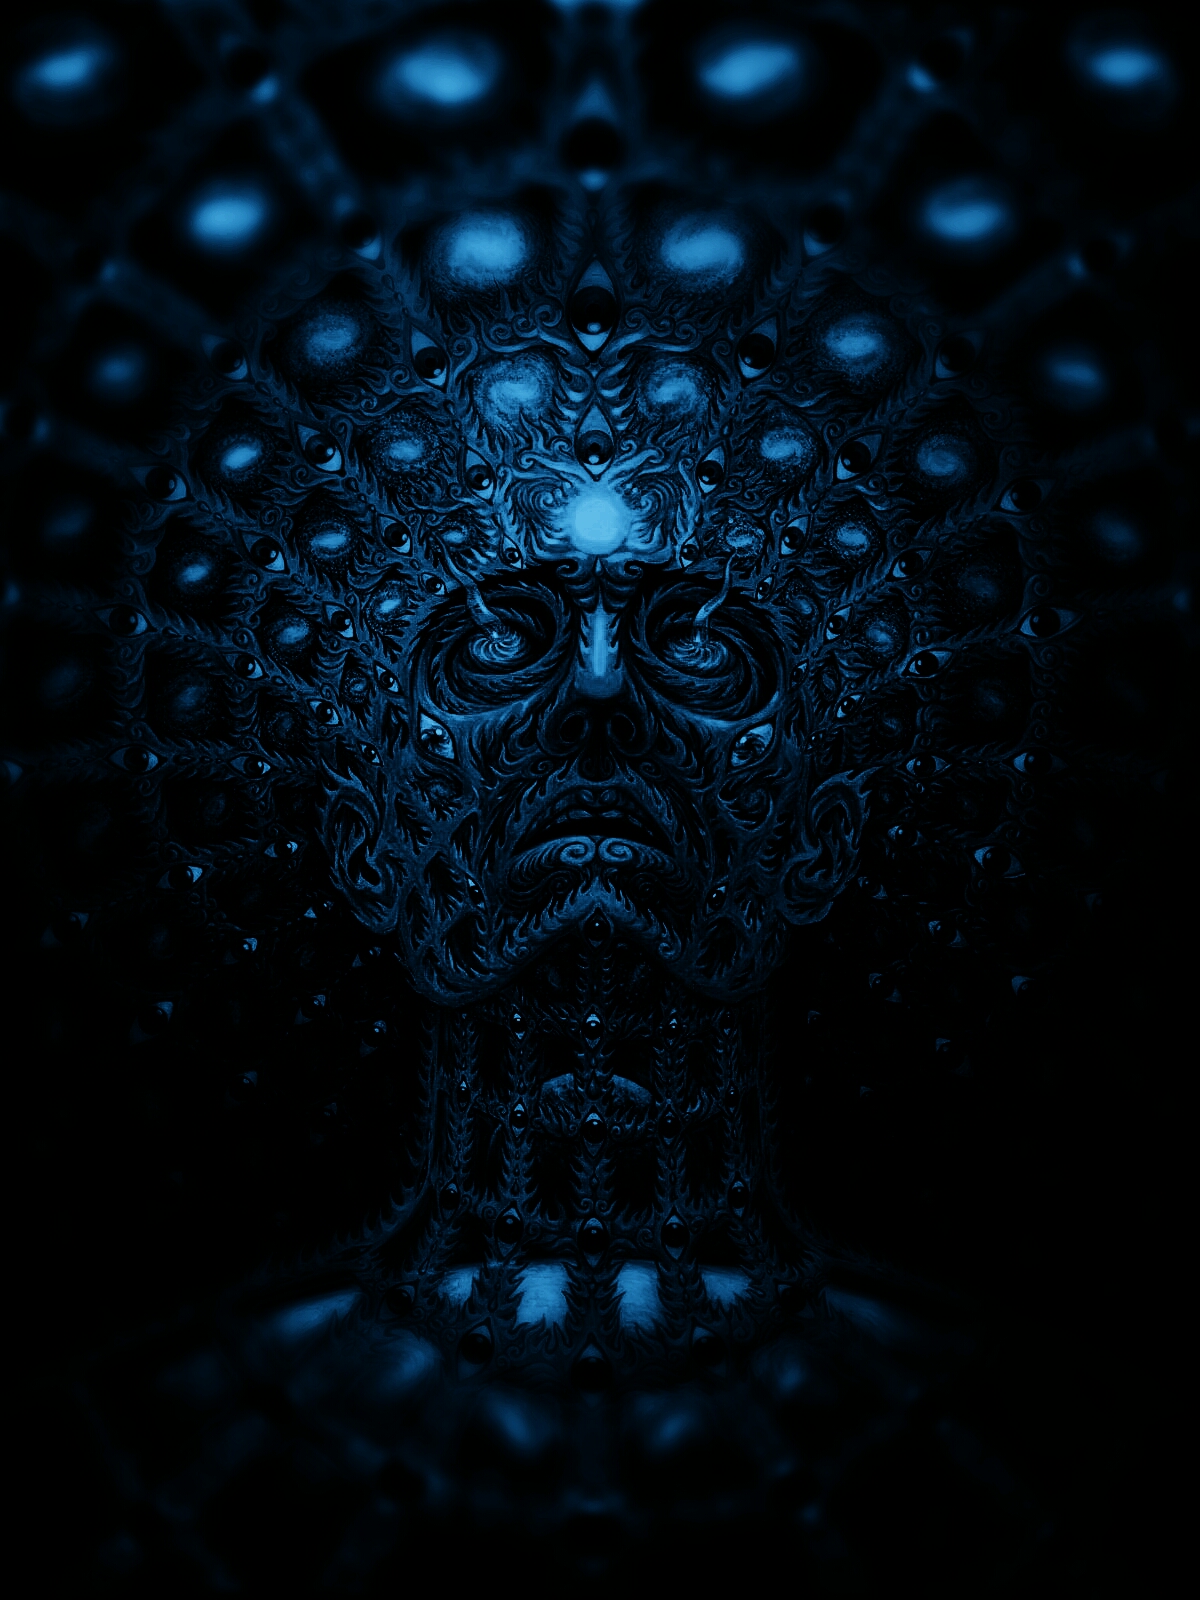 Tool Band Background\wallpaper For Smartphone - Tool Band Art , HD Wallpaper & Backgrounds